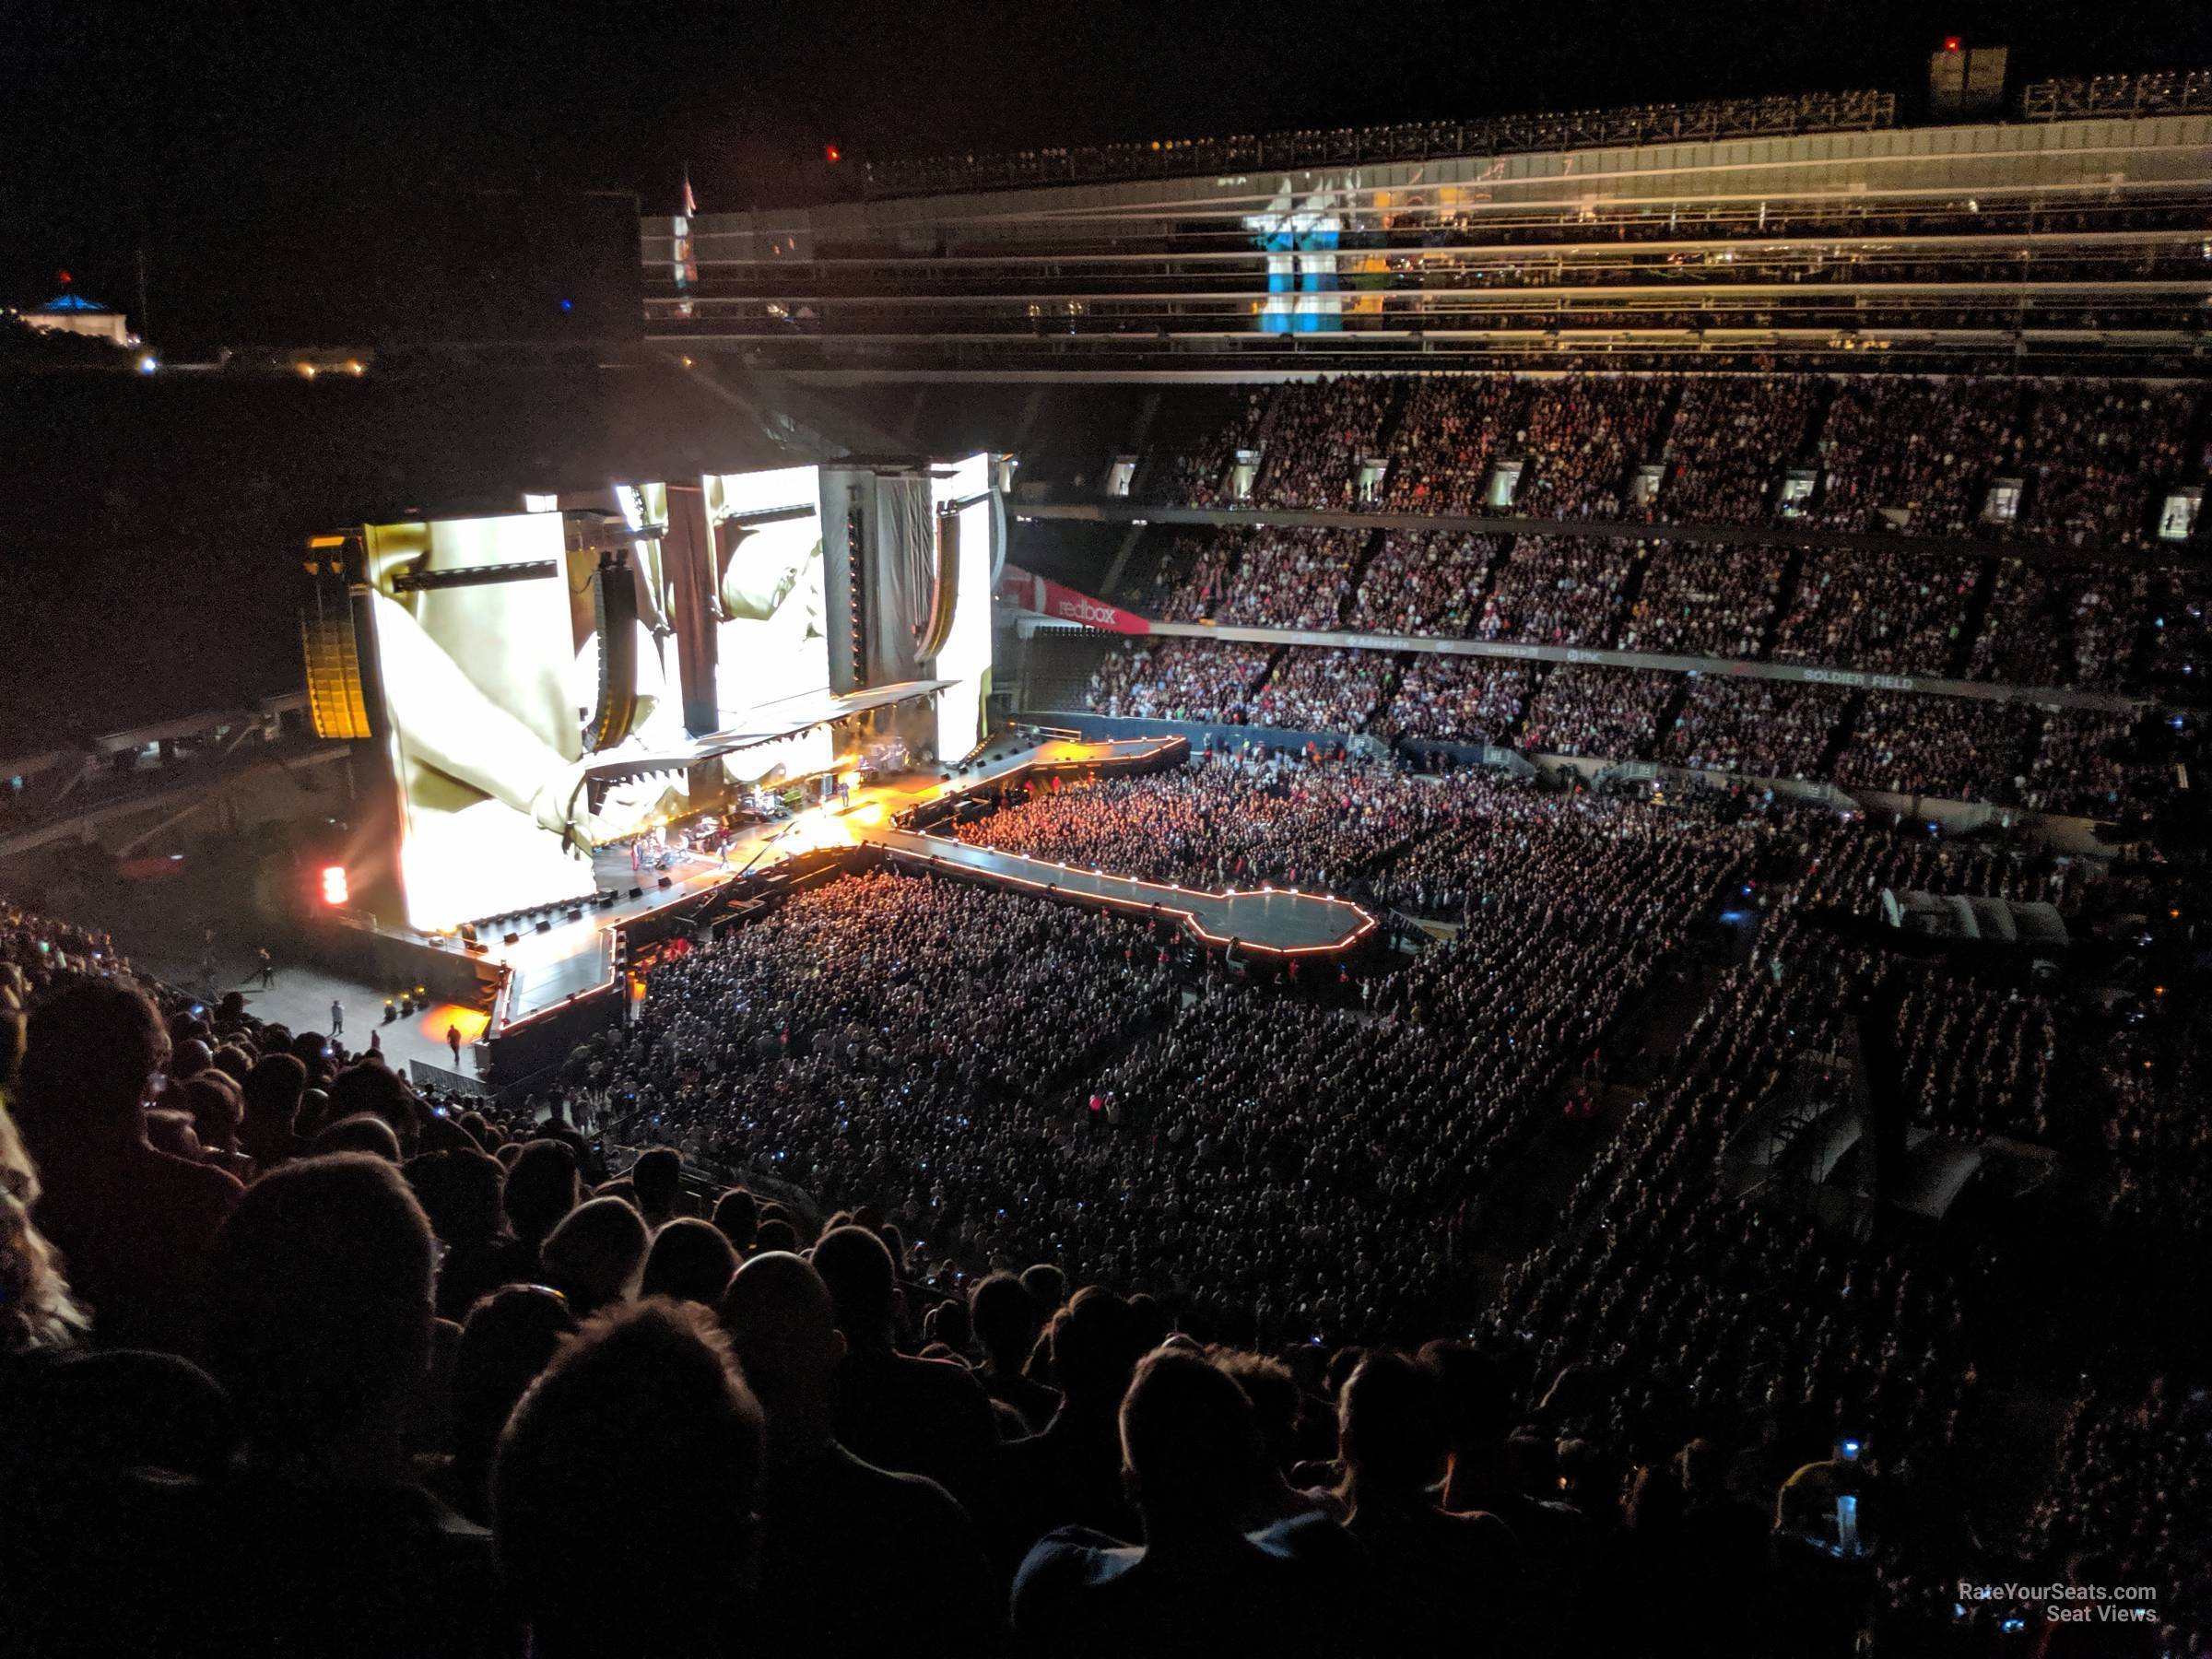 section 435, row 16 seat view  for concert - soldier field